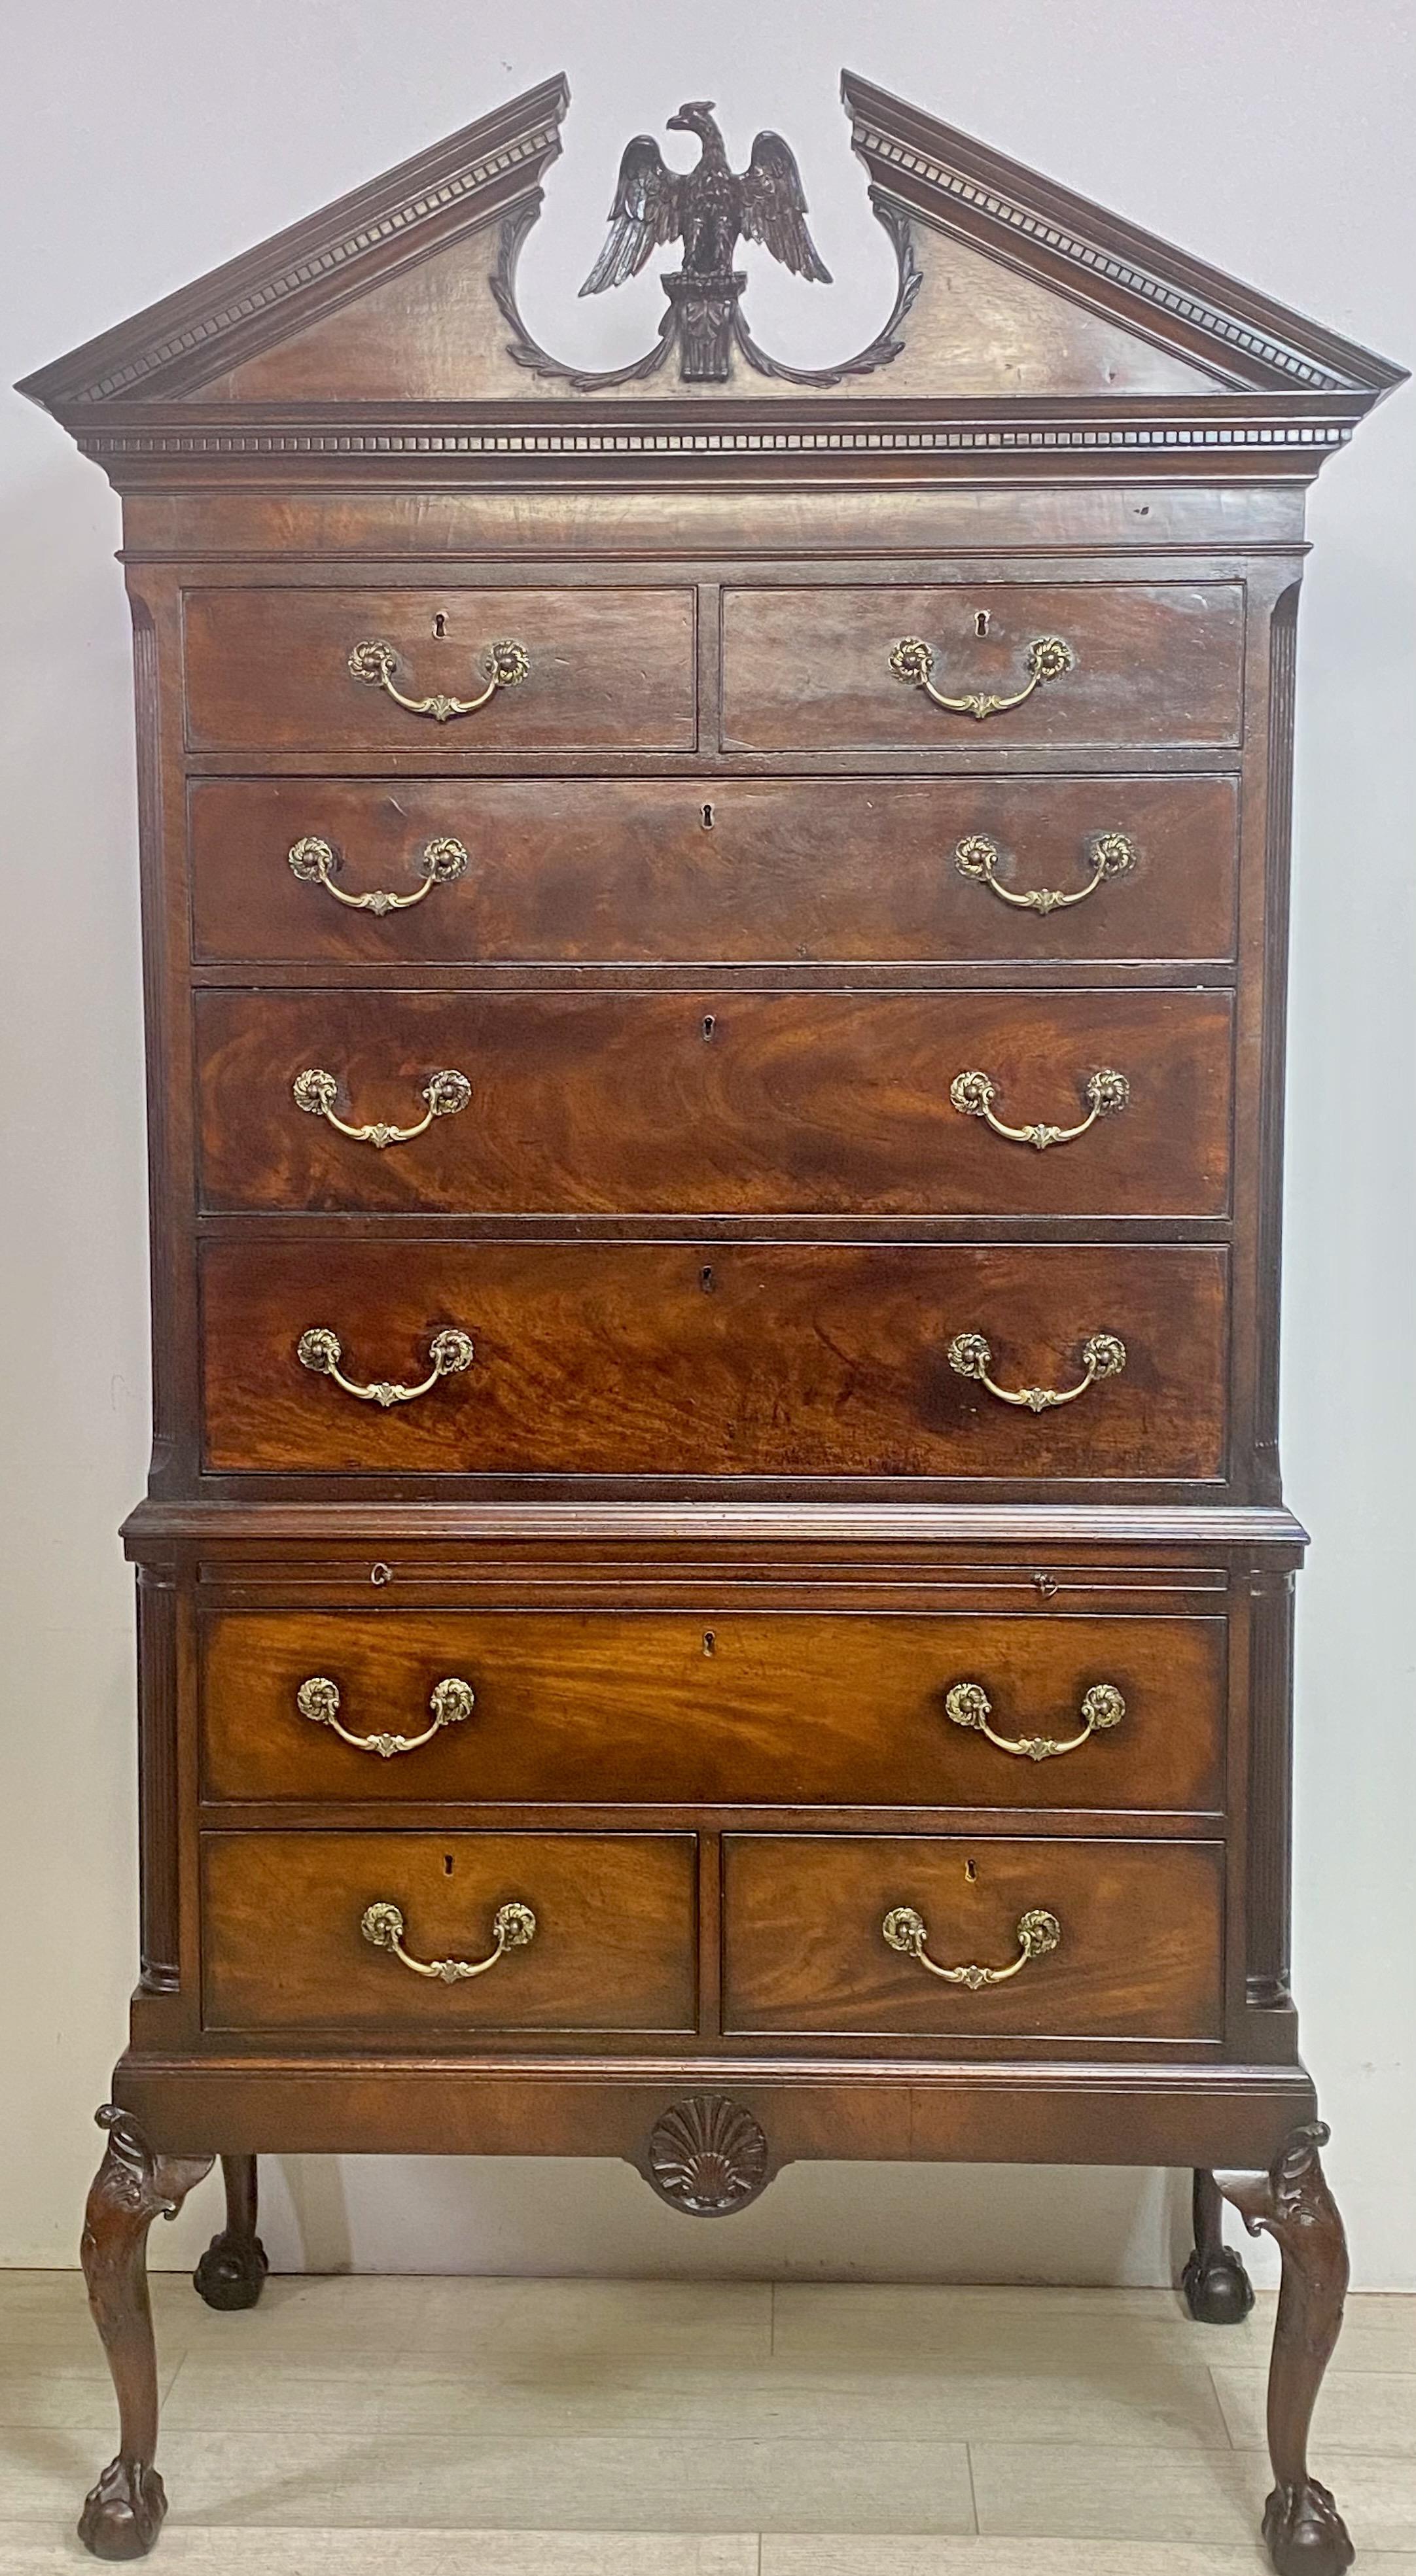 Thrilled to find this piece!
An exceptional 18th century English Chippendale style mahogany chest on stand. Having flame mahogany veneer drawer fronts over solid oak, the body of solid mahogany with secondary woods of oak and pine. 
Refreshed